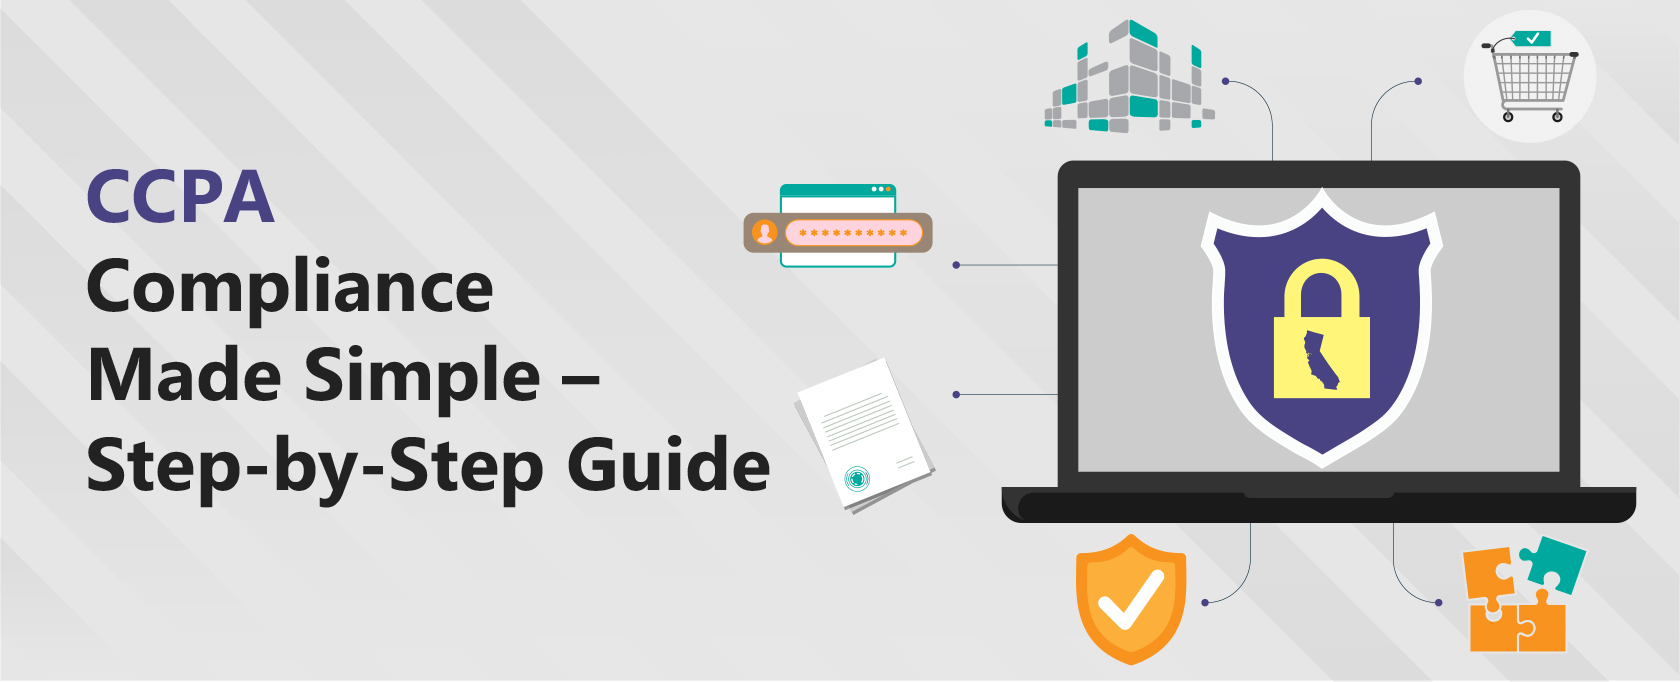 CCPA Compliance Made Simple – Step-by-Step Guide